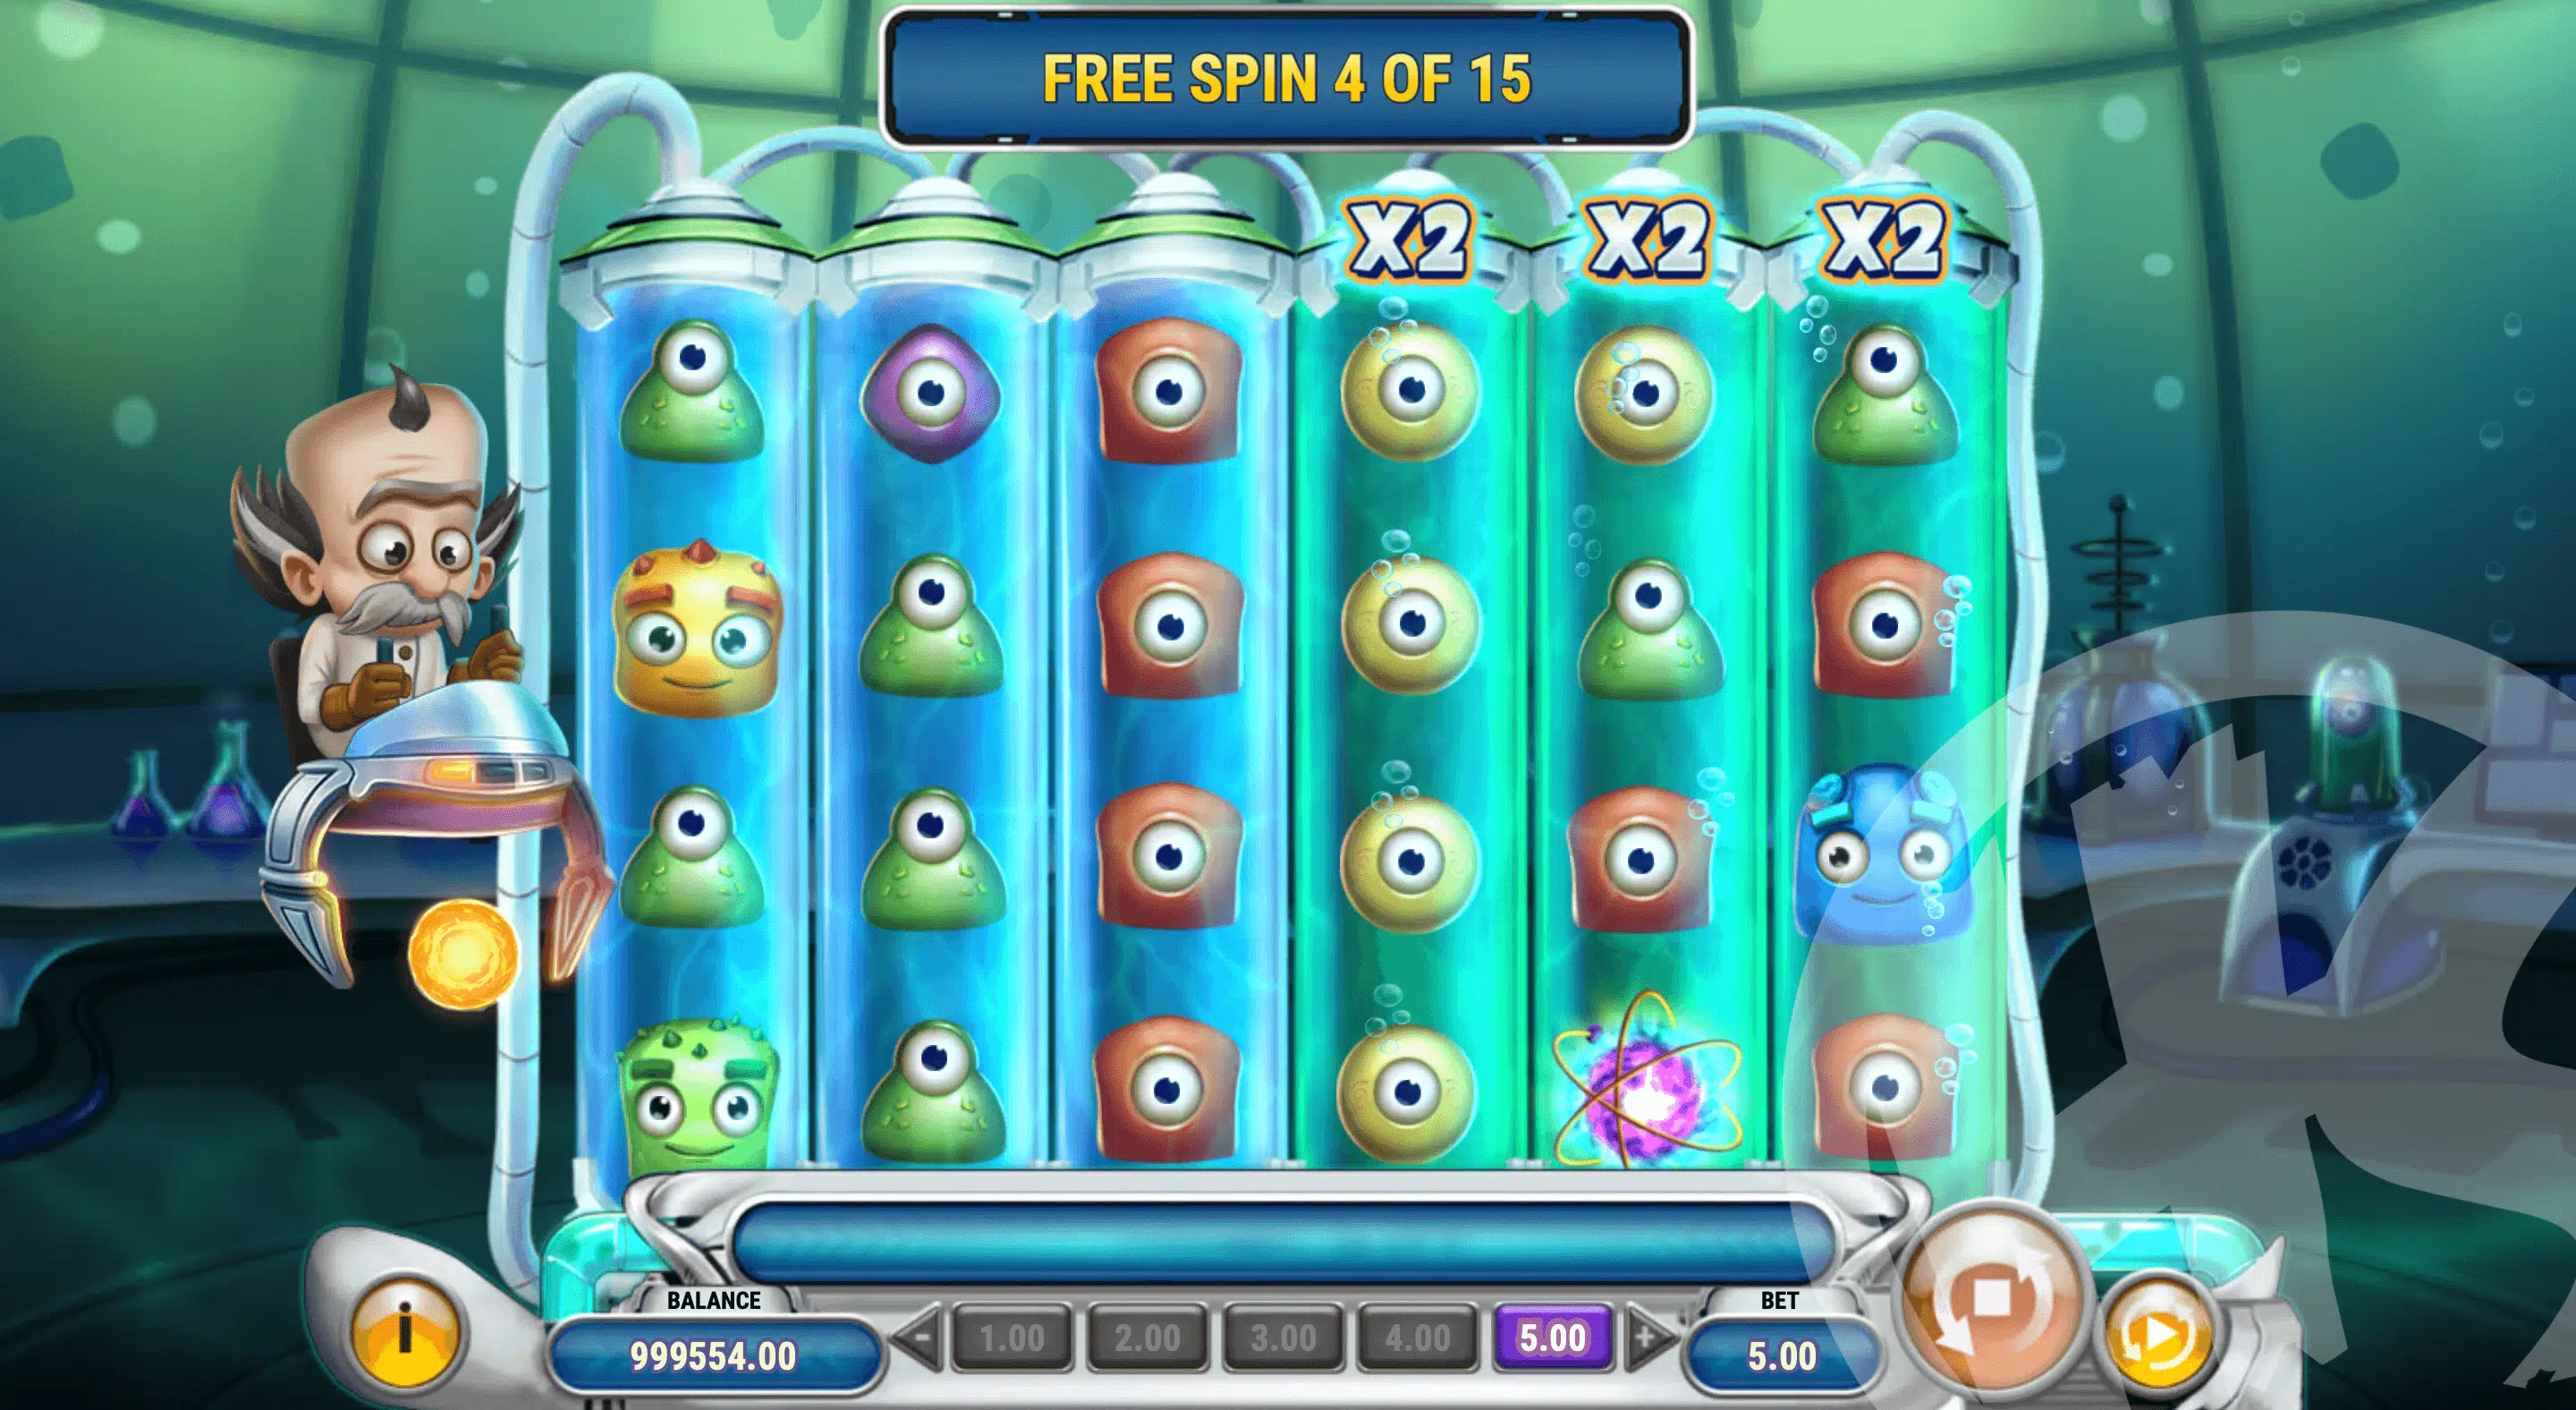 3 or More Scatters Award Free Spins